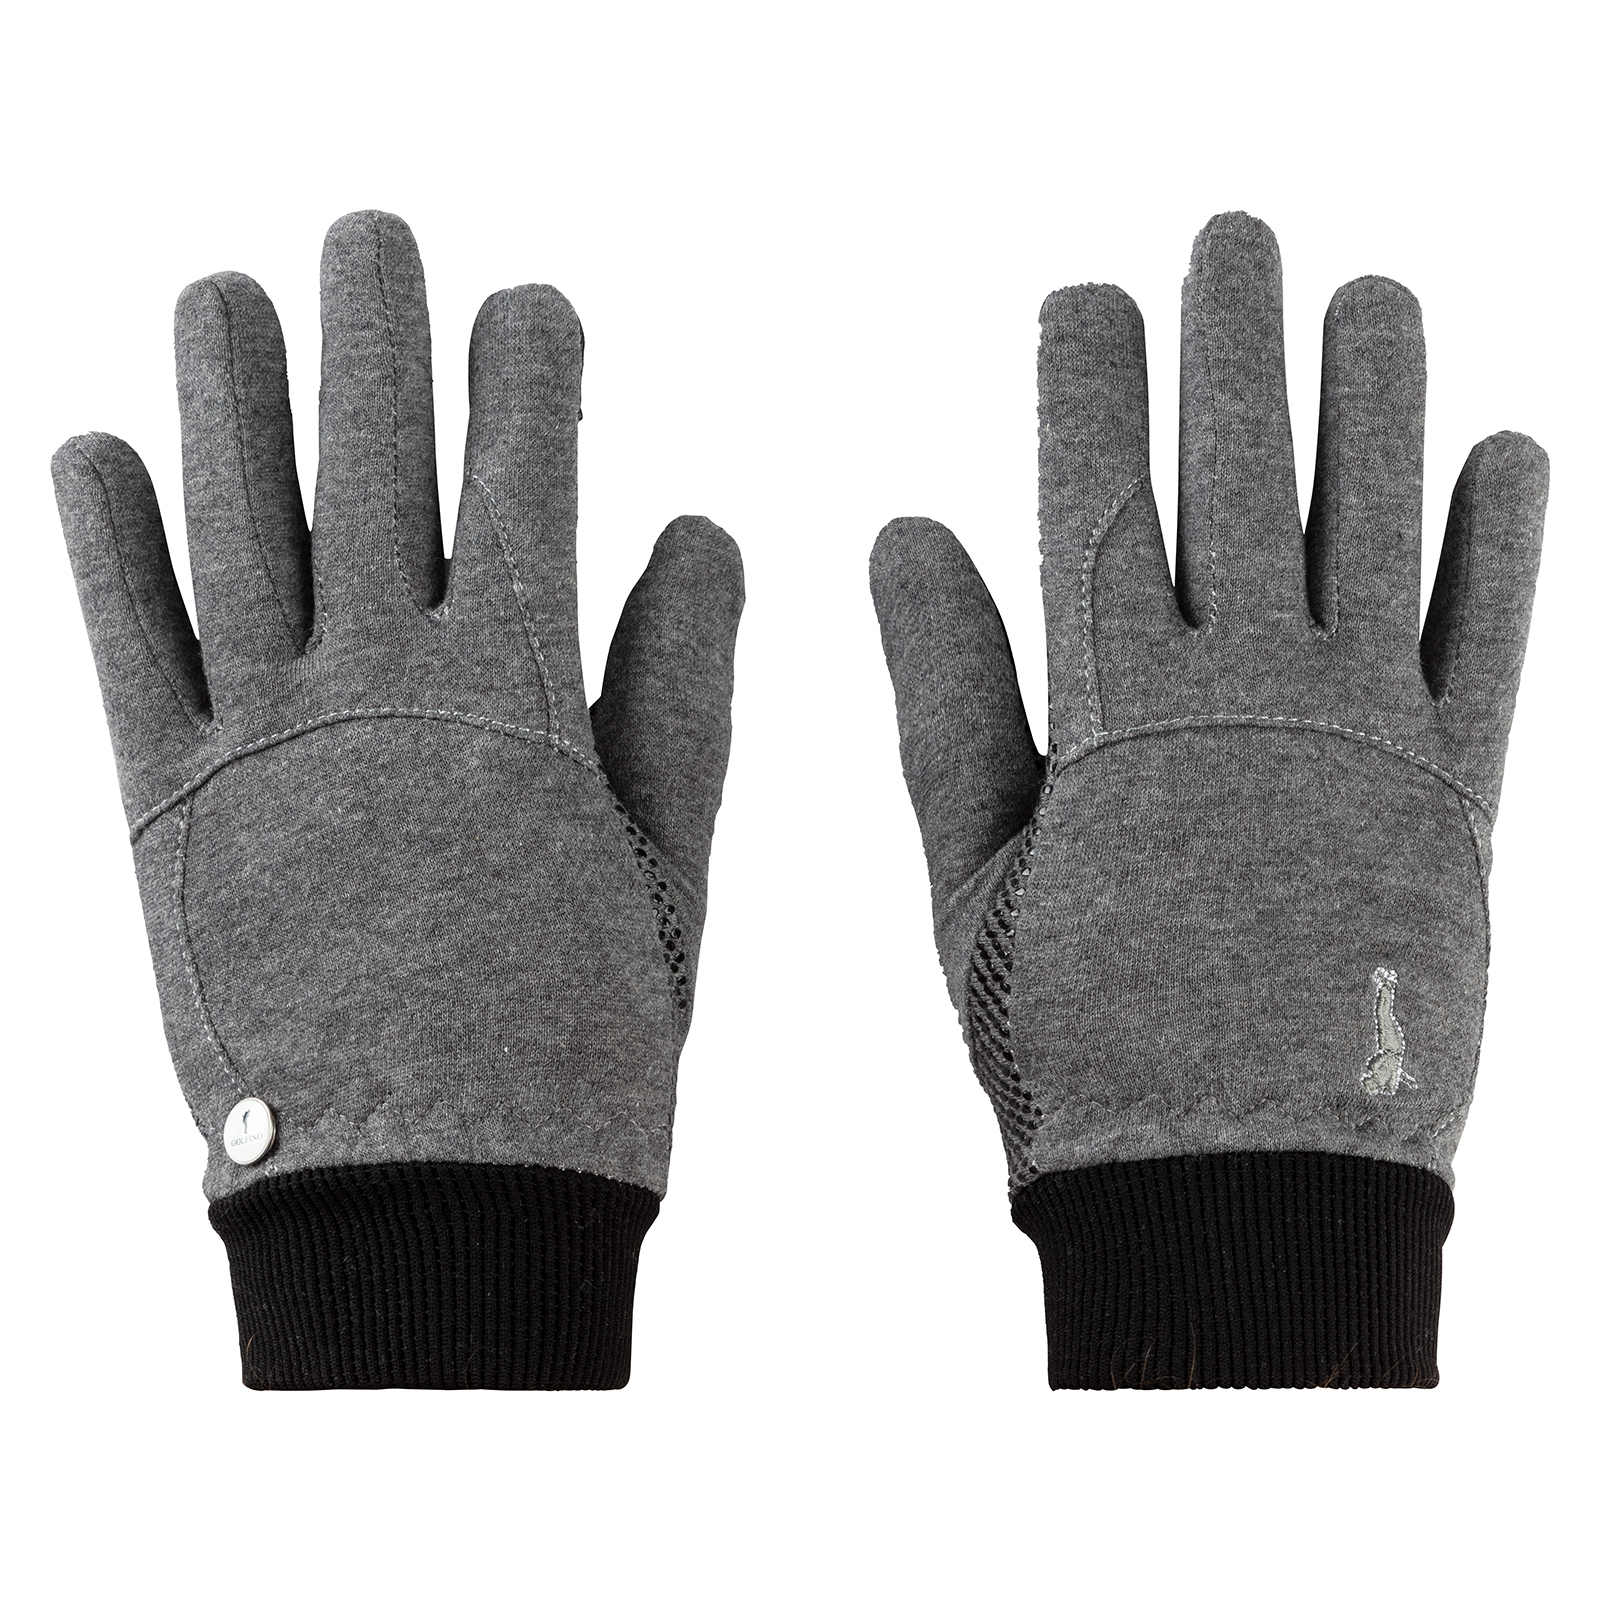 Men's warm functional gloves with wind protection